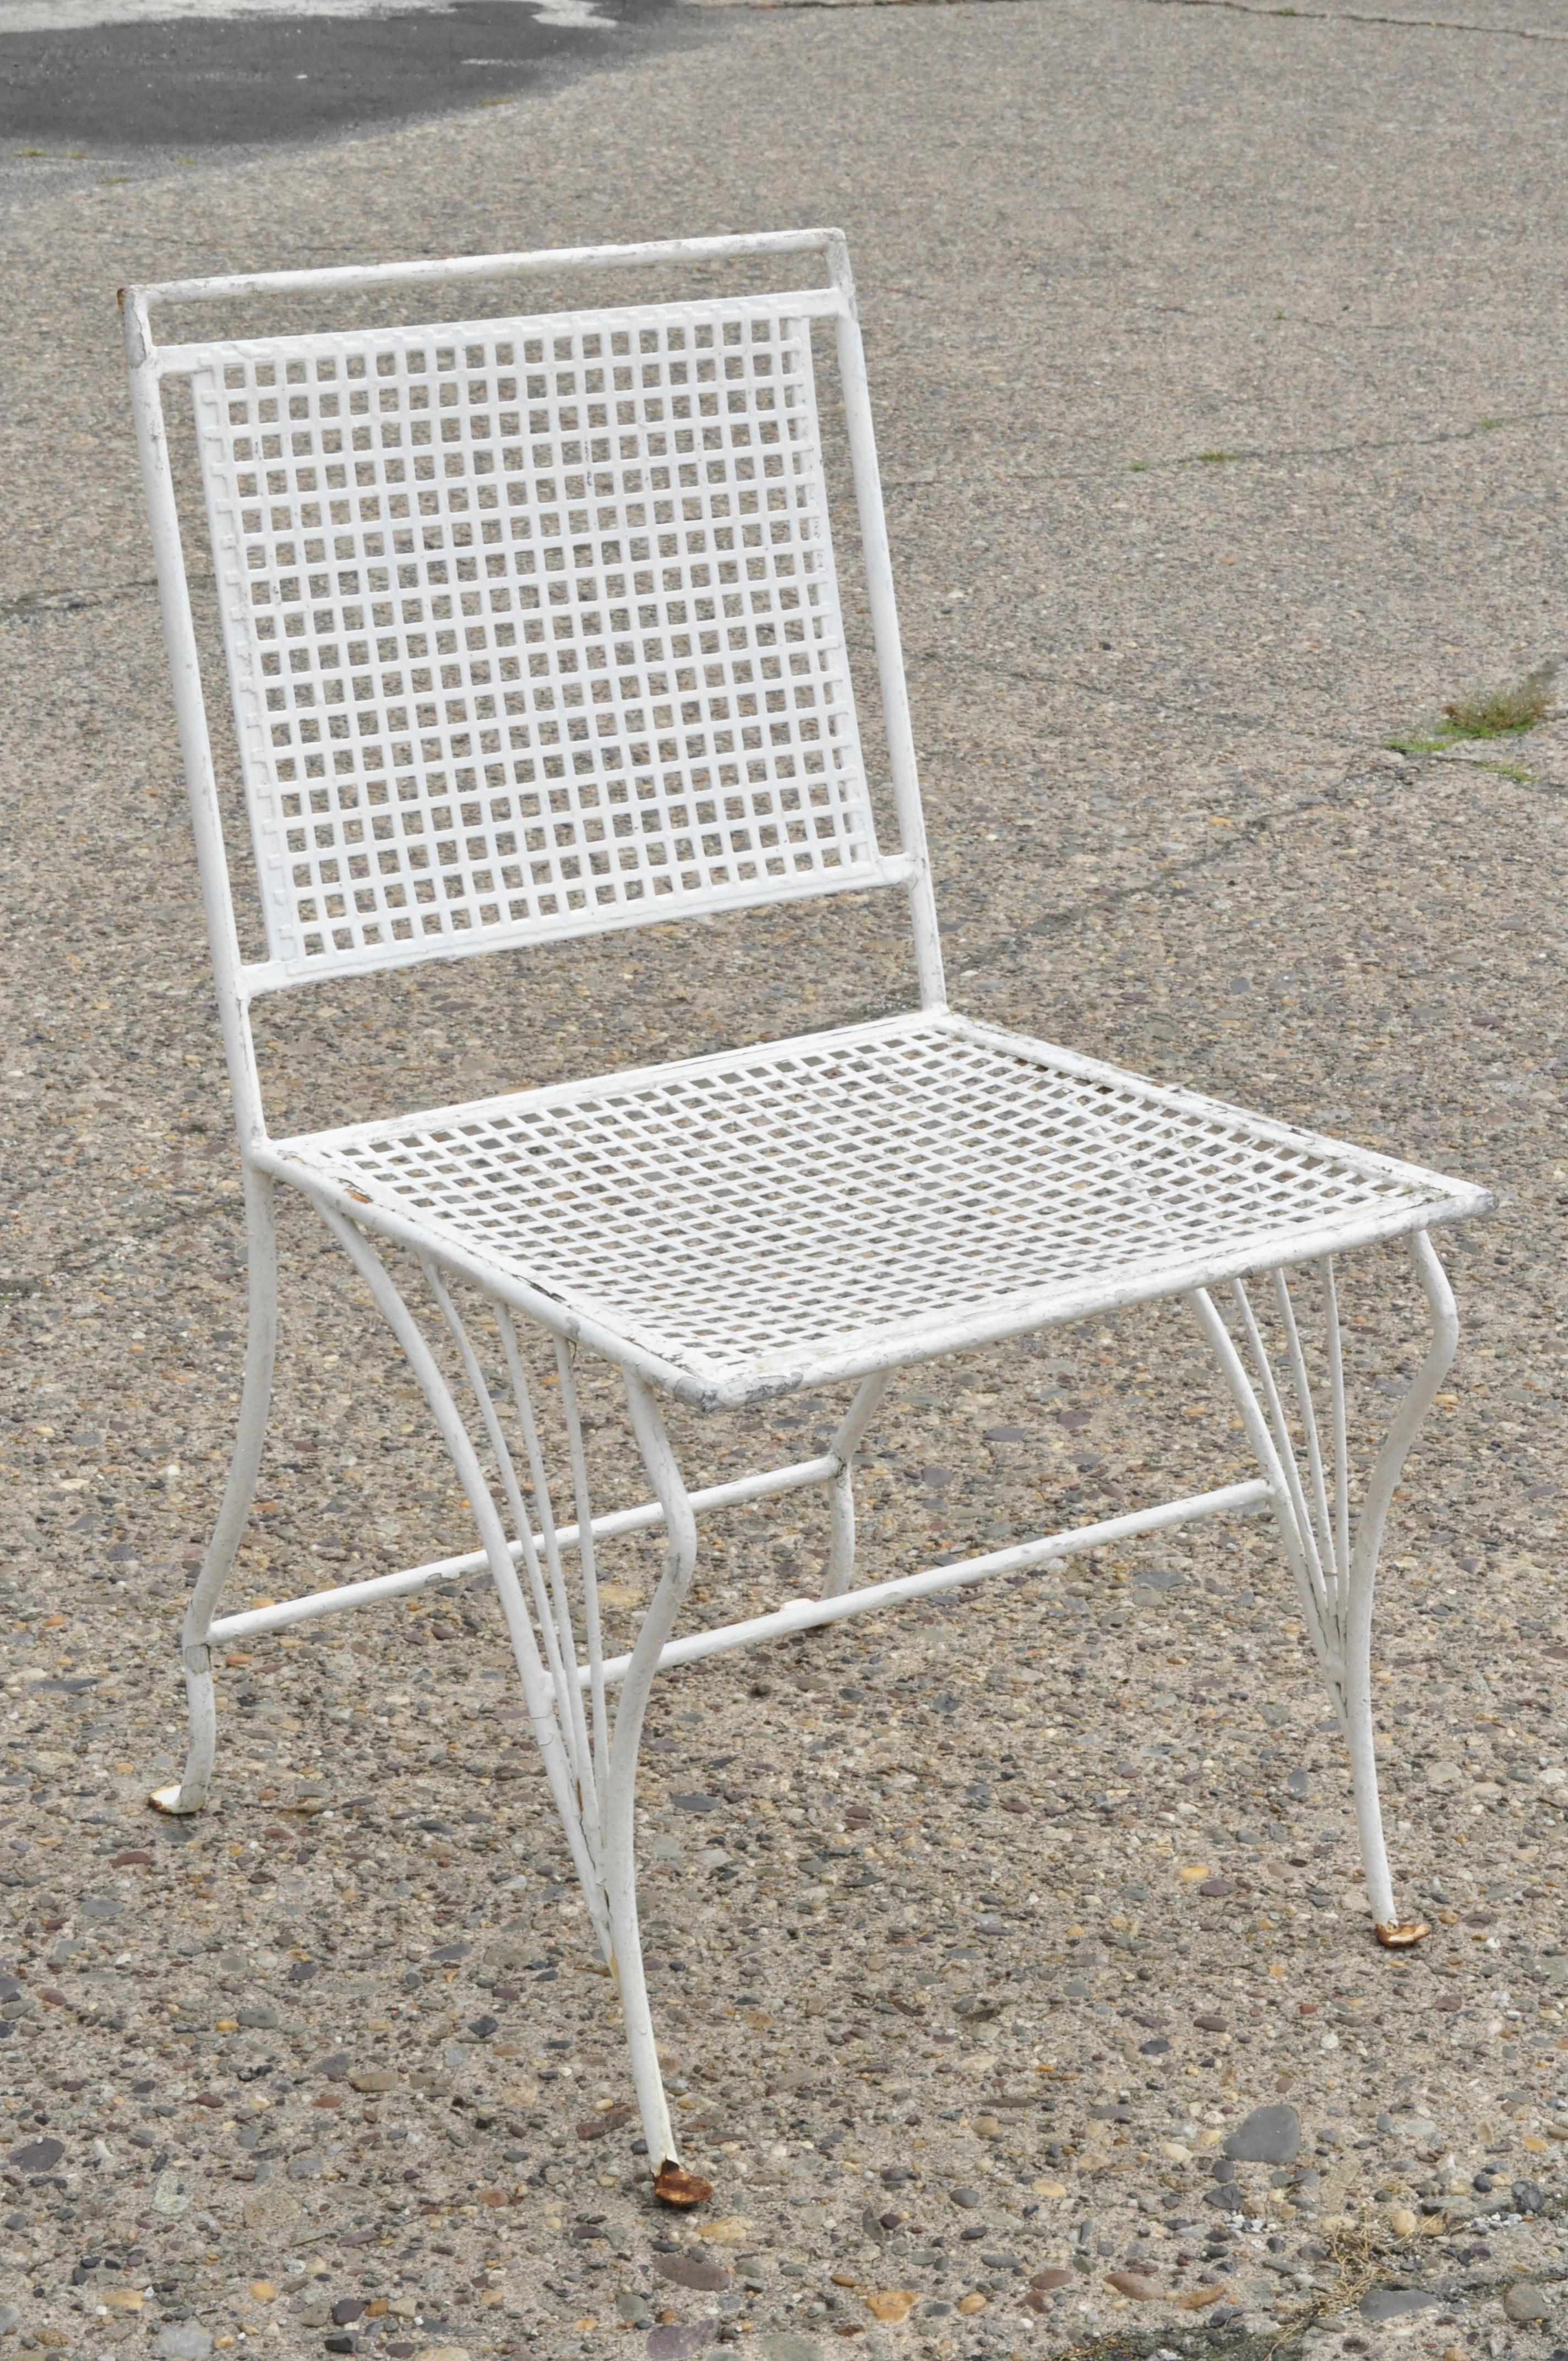 Set of 4 antique wrought iron Art Nouveau French style garden patio dining chairs. Item features sleek art nouveau legs, perforated back and seats, wrought iron construction, sleek sculptural form, circa mid-20th century. Measurements: 32